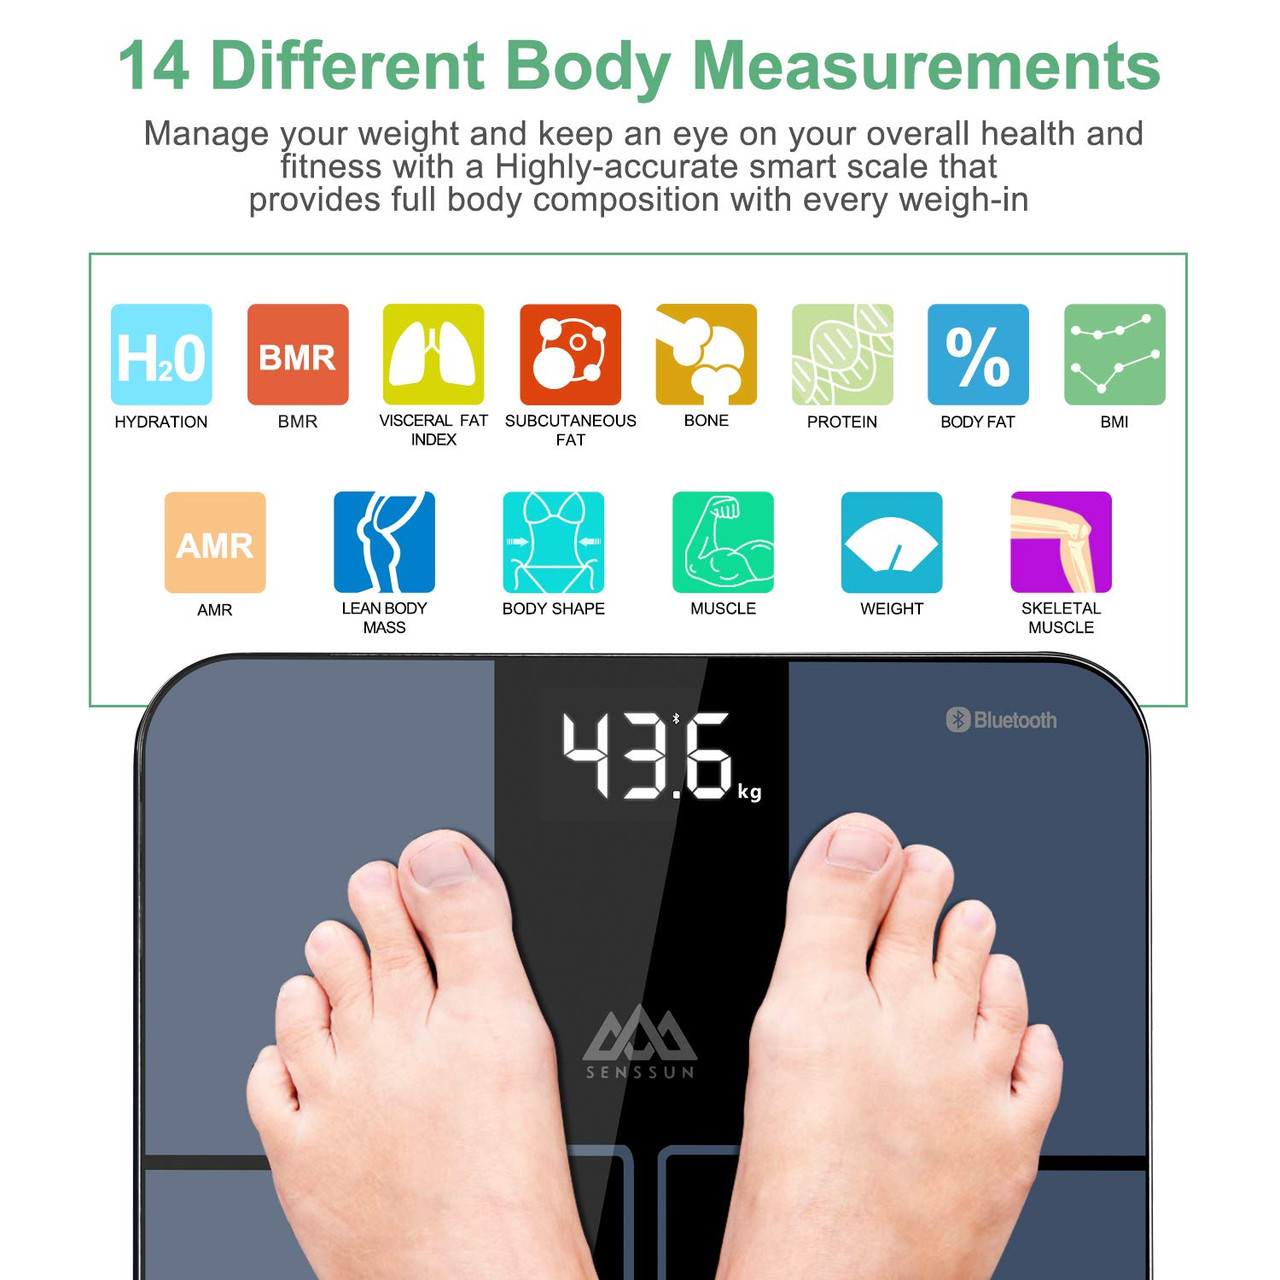 SENSSUN Bluetooth Body Fat BMI Scale, High Precision ITO Coating Bathroom  Weight Scale with Smartphone App, Sync with Fitbit, Apple Health and Google